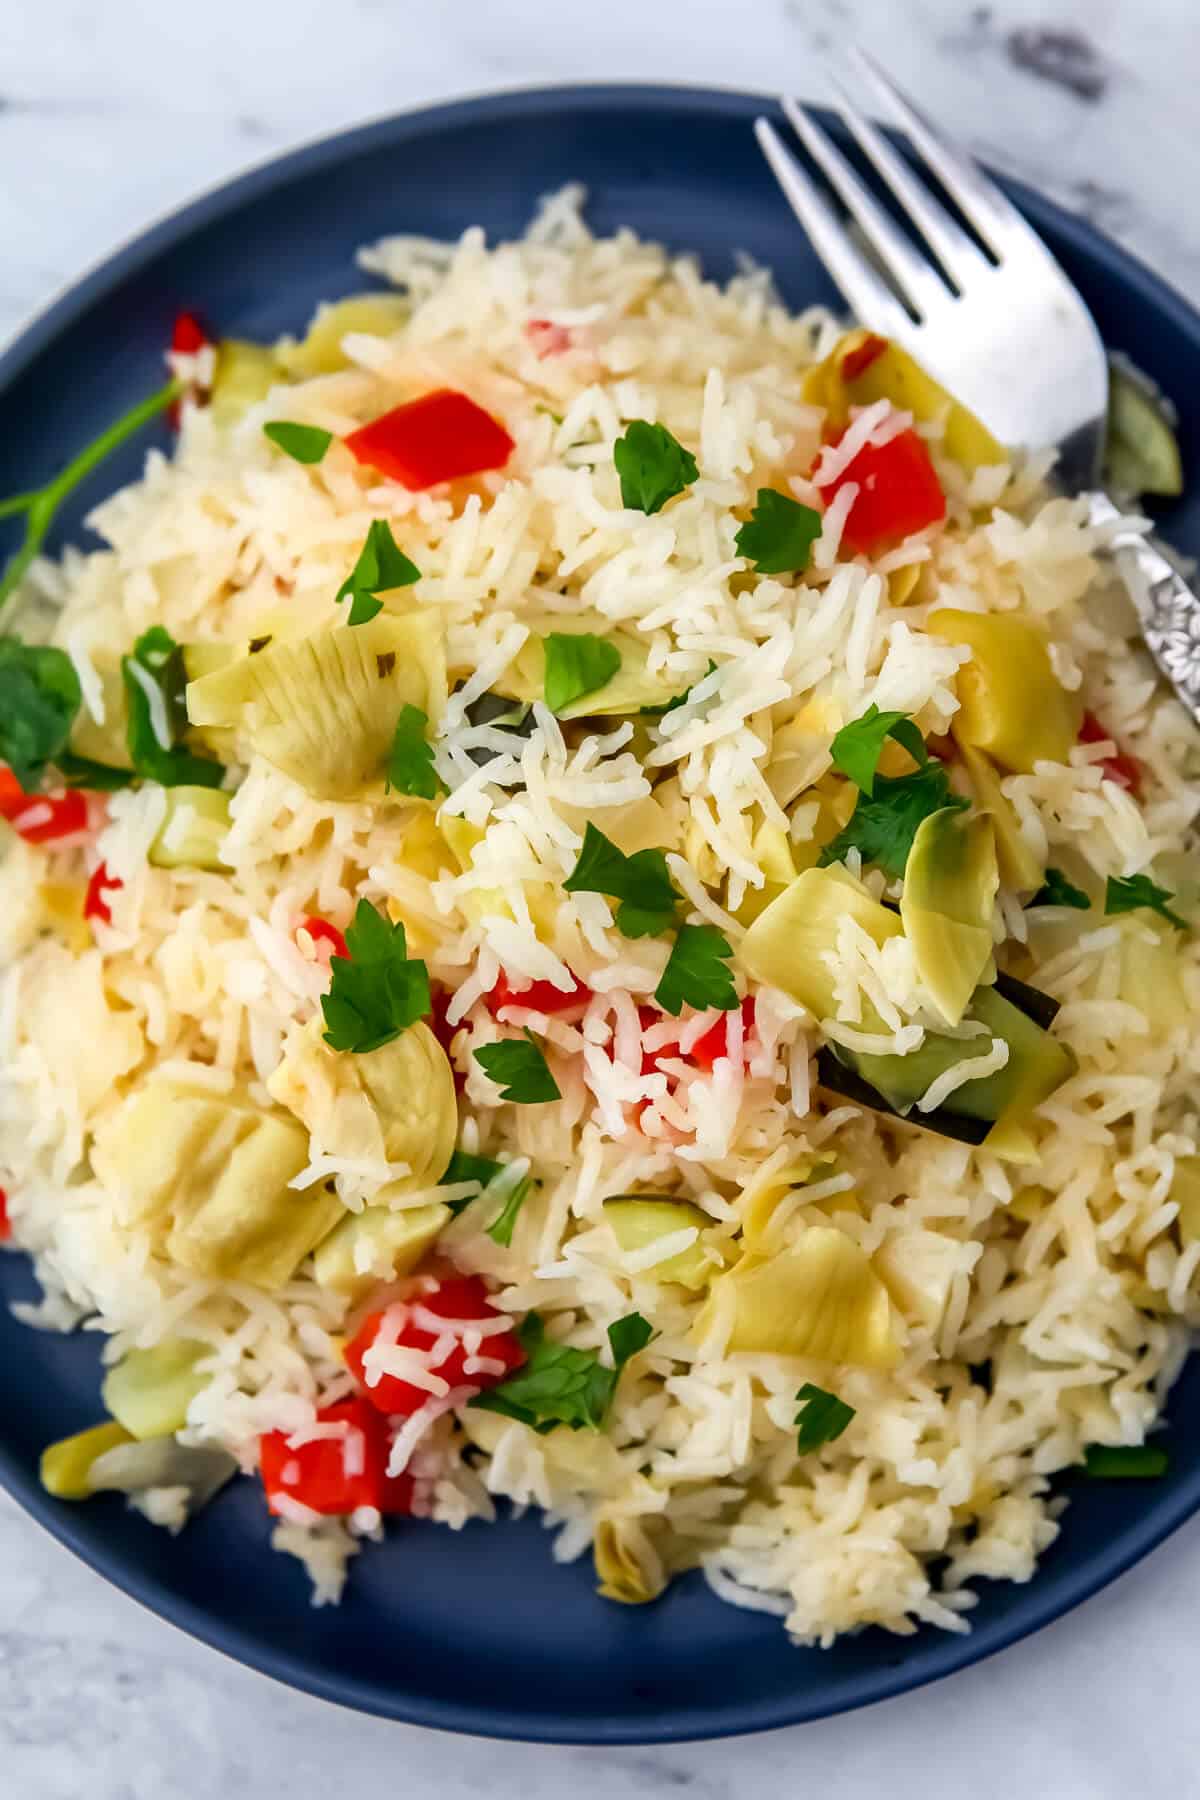 A top view of a plate of vegetable rice pilaf.